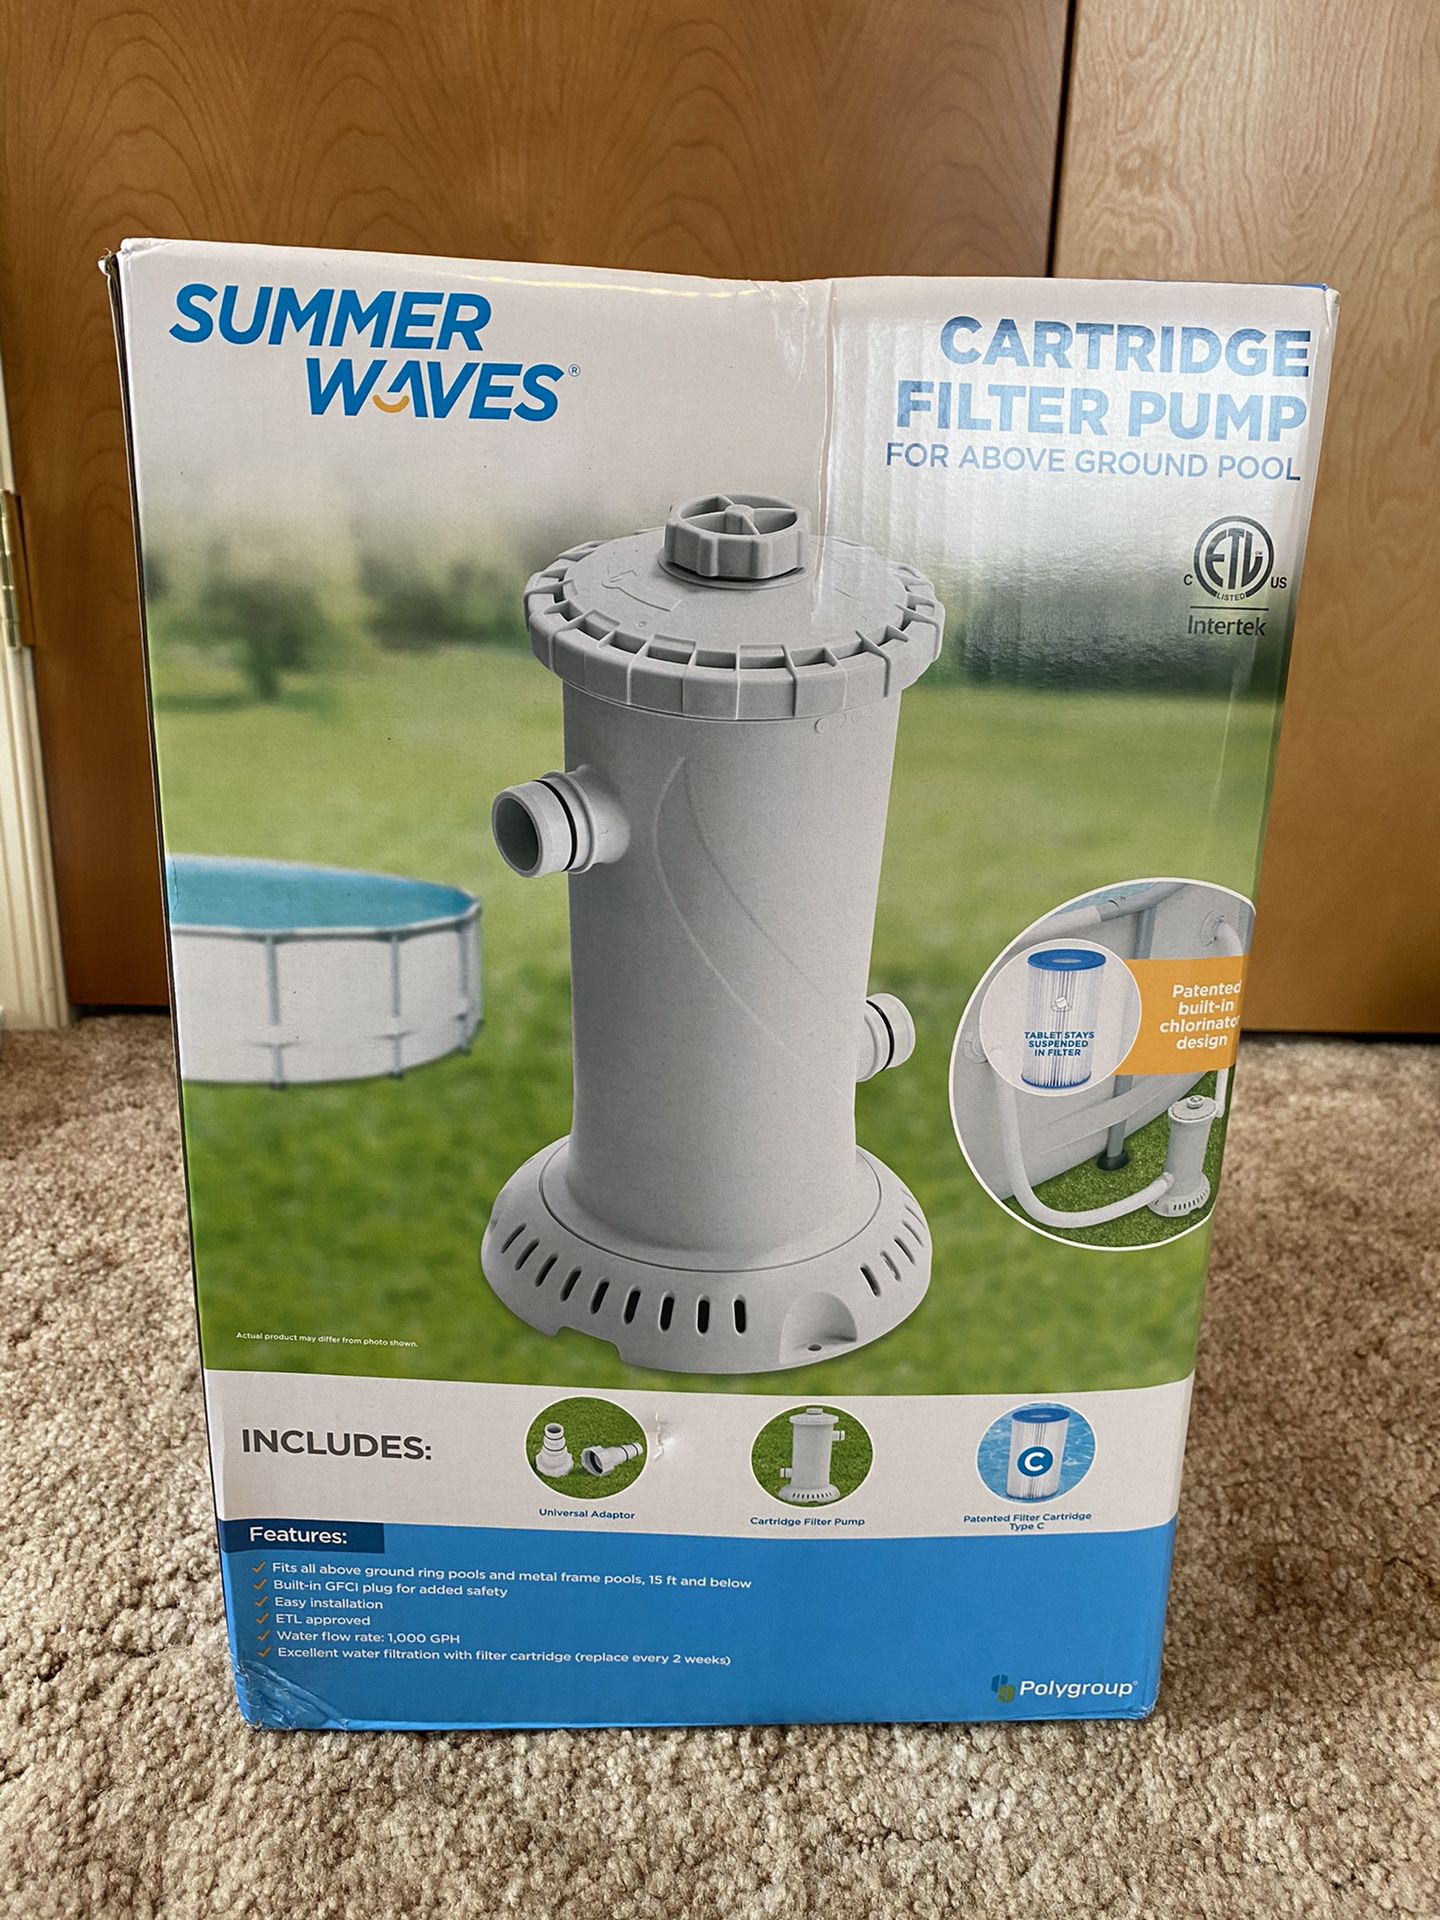 Cartridge Filter Pump For Above Ground Pool